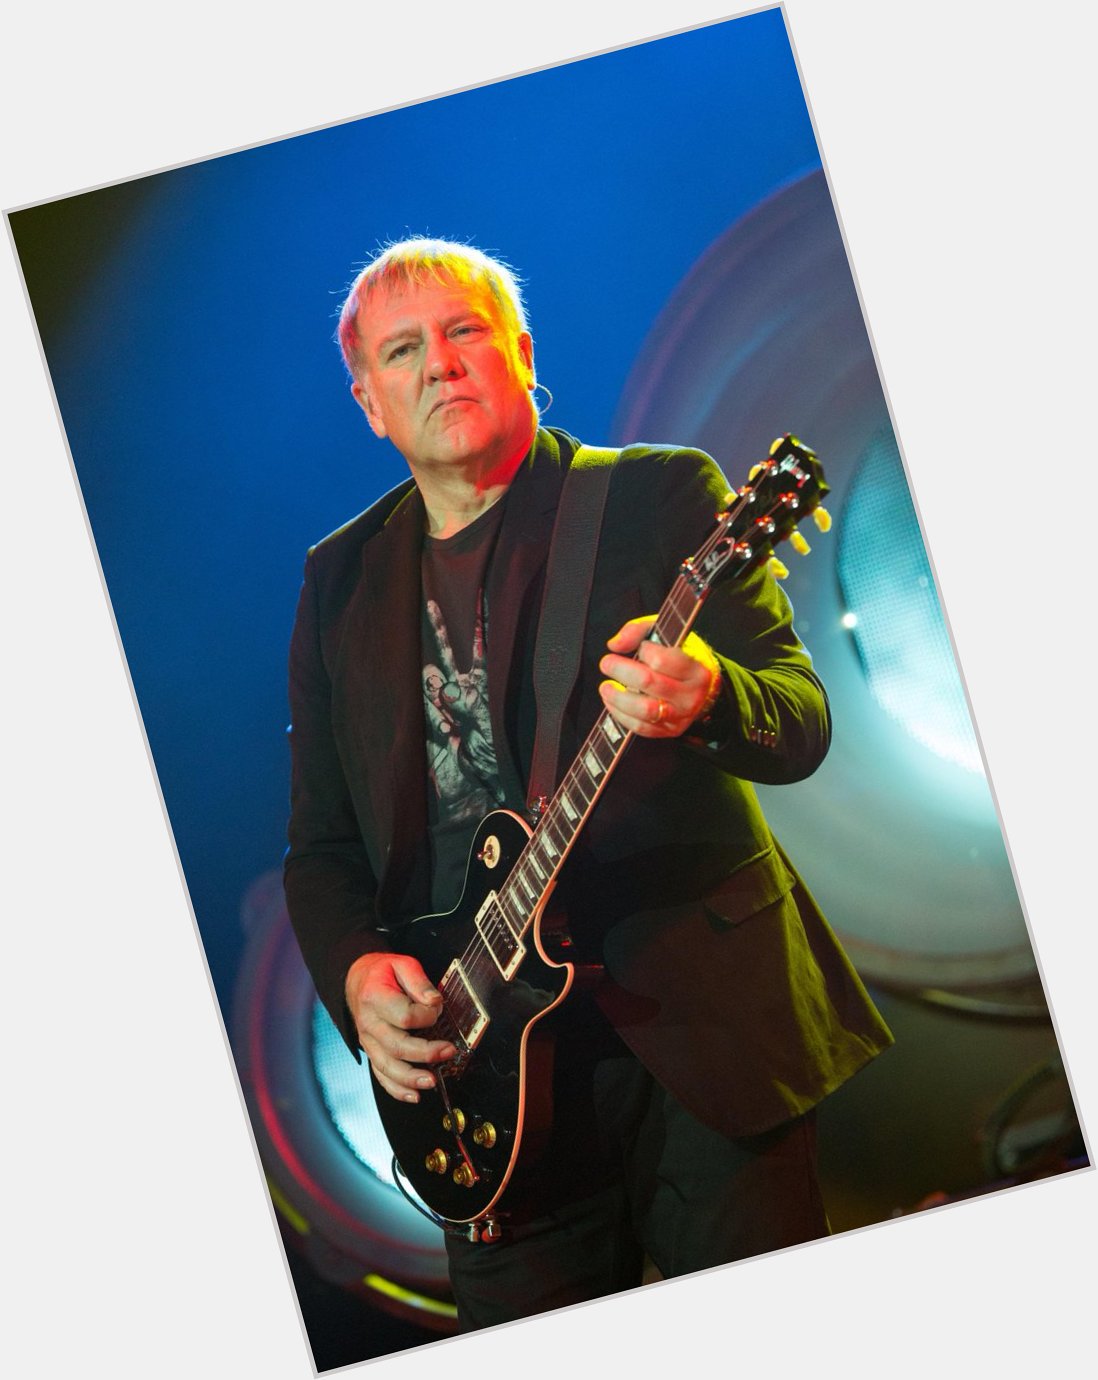 Happy Birthday Alex Lifeson Thanks for the tour! Hope you\re enjoying the rest of the summer!! 